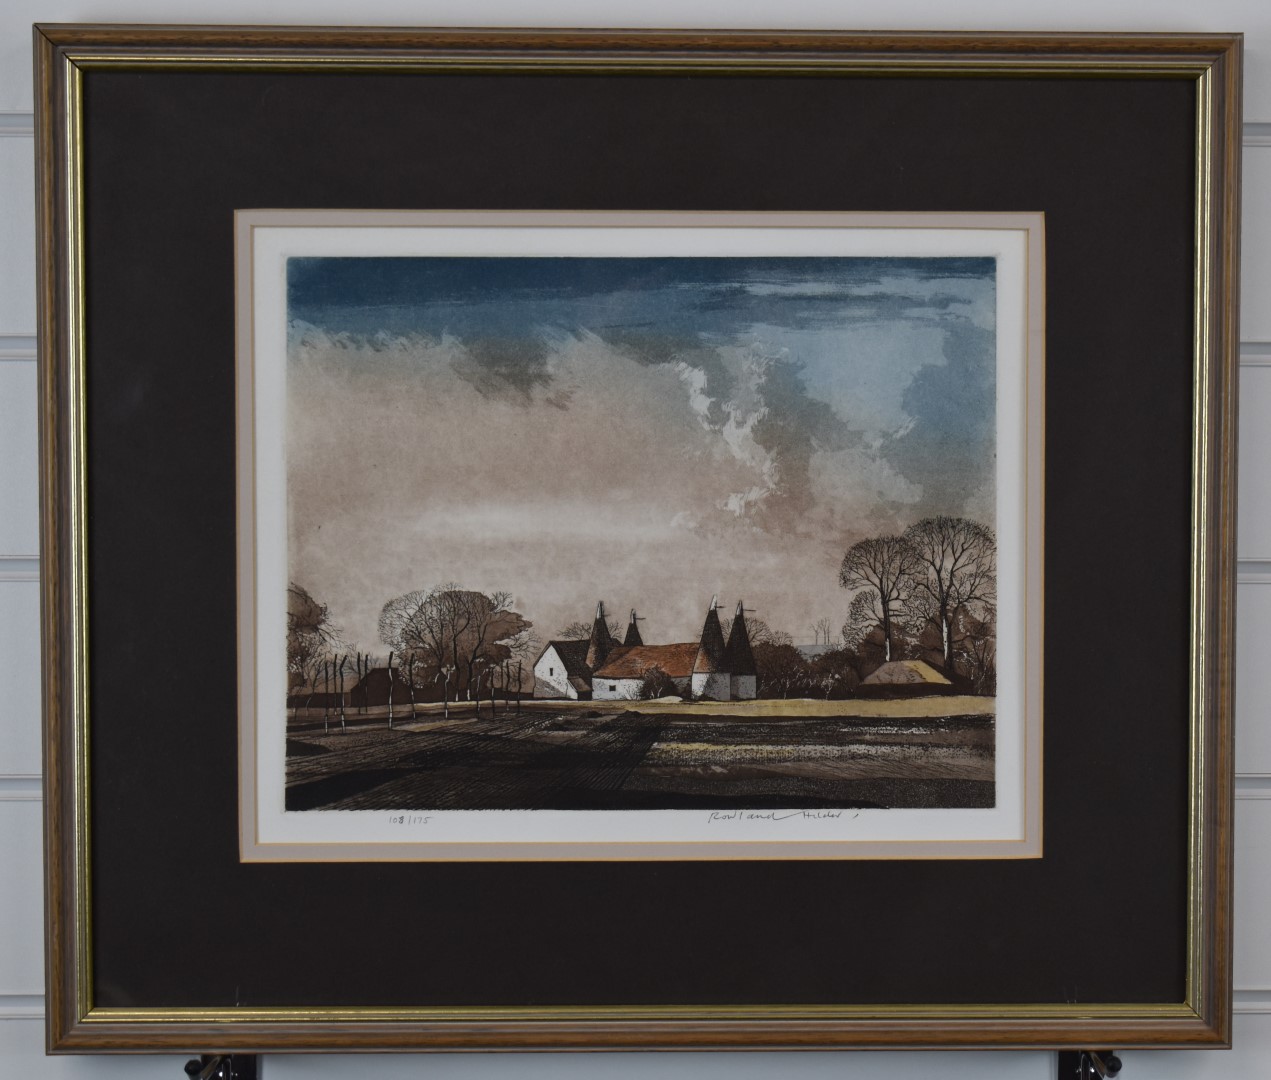 Rowland Hilder signed limited edition (108/175) print of oast houses, 27.5 x 34.5cm, in gilt frame - Image 2 of 5